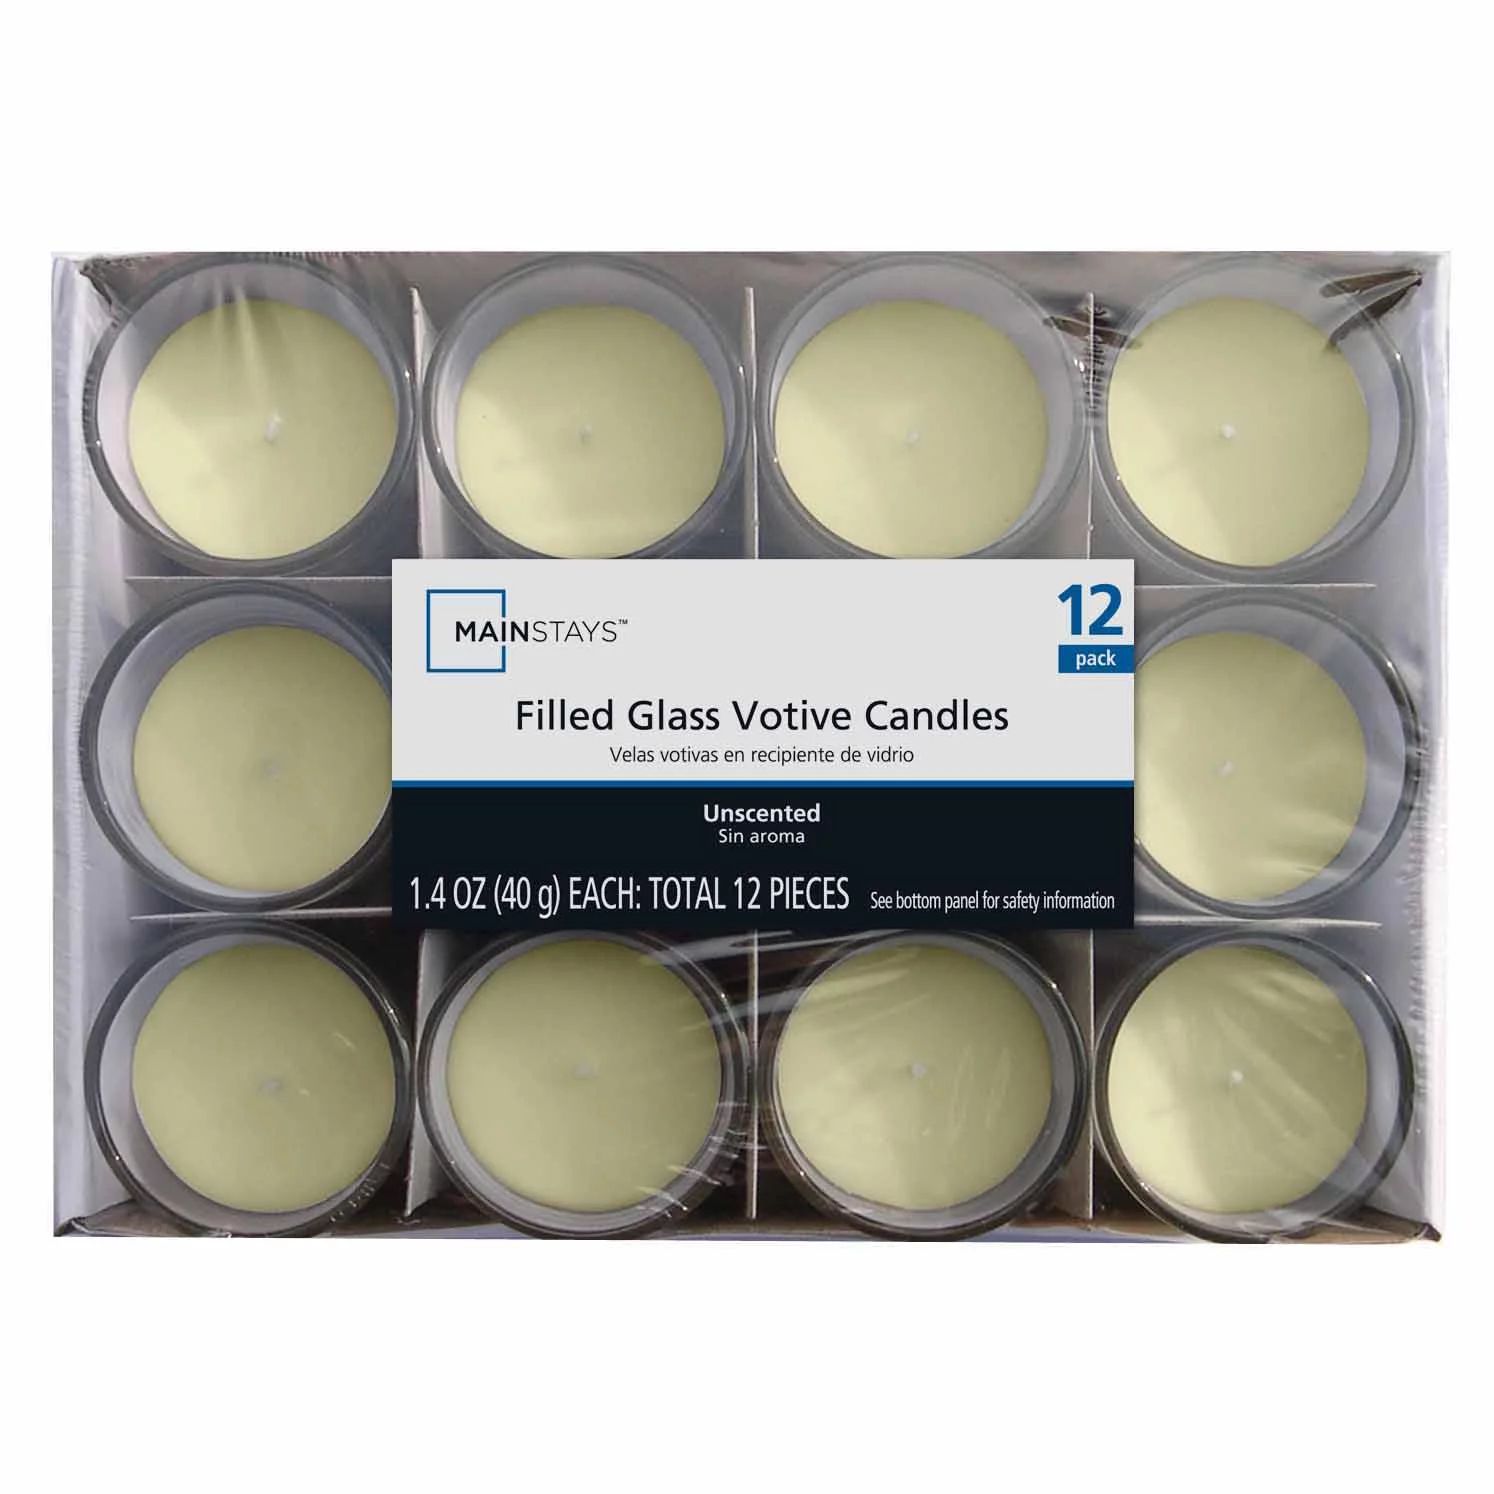 Mainstays Filled Glass Votive Unscented Candles Ivory, 12 pack | Walmart (US)